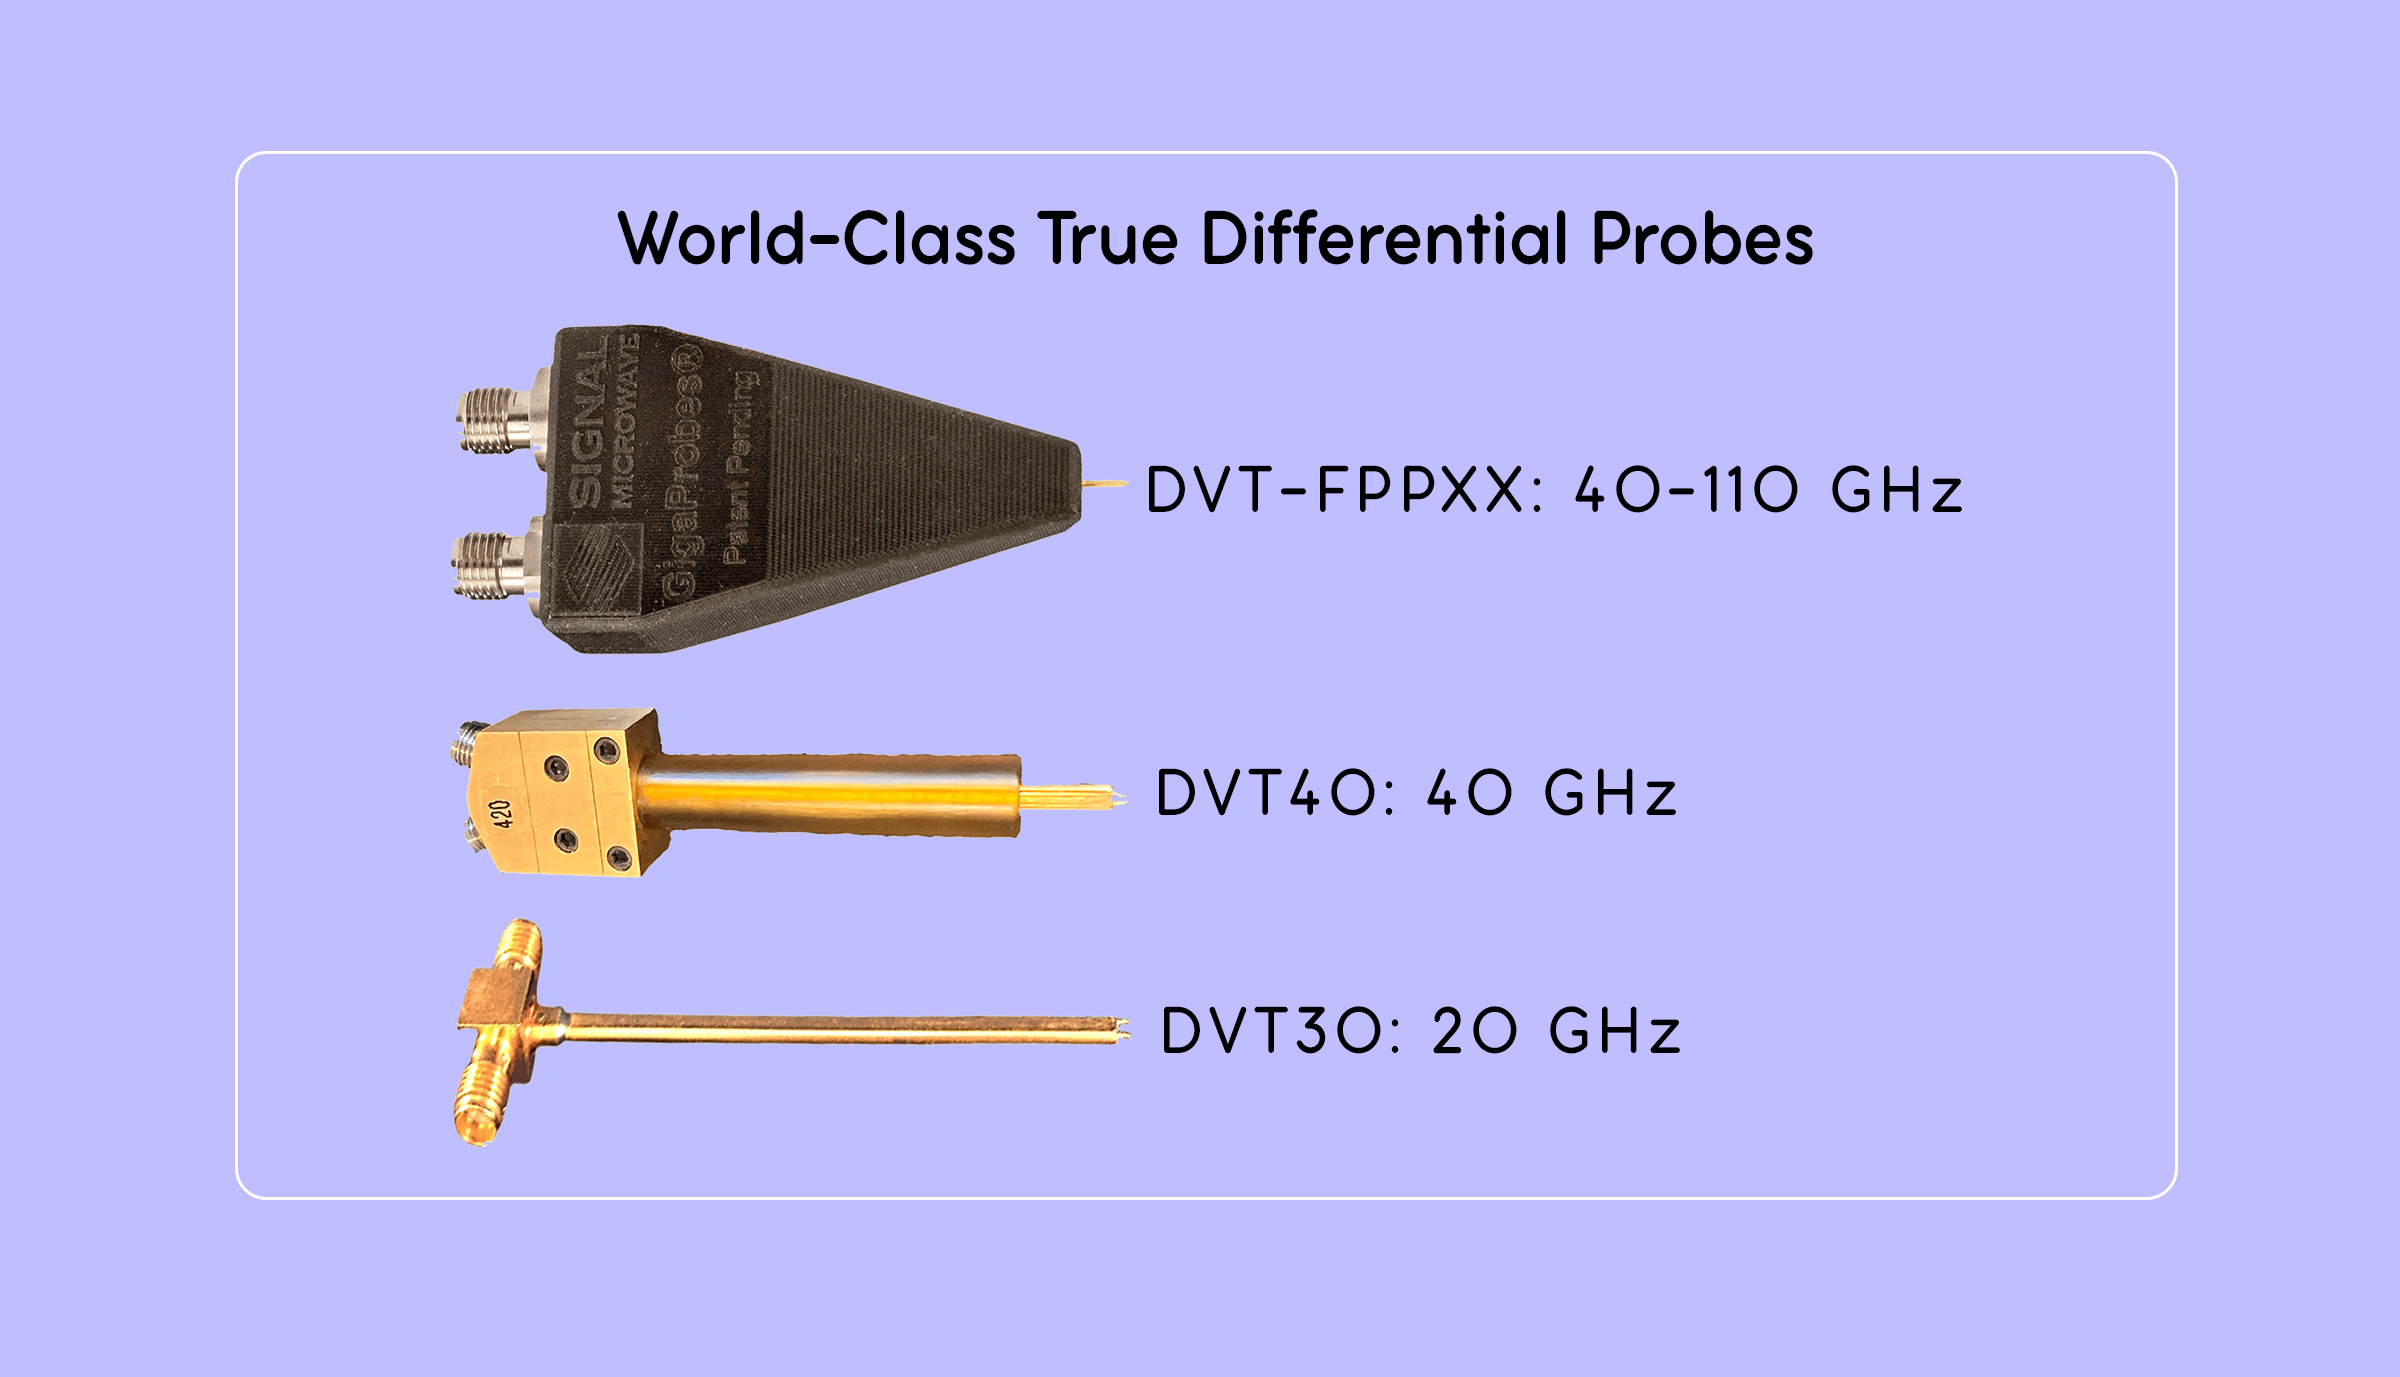 Image shows the GigaProbes DVT-FPPXX 60 GHz probe, DVT40 40 GHz probe and the DVT30 20 GHz probe.